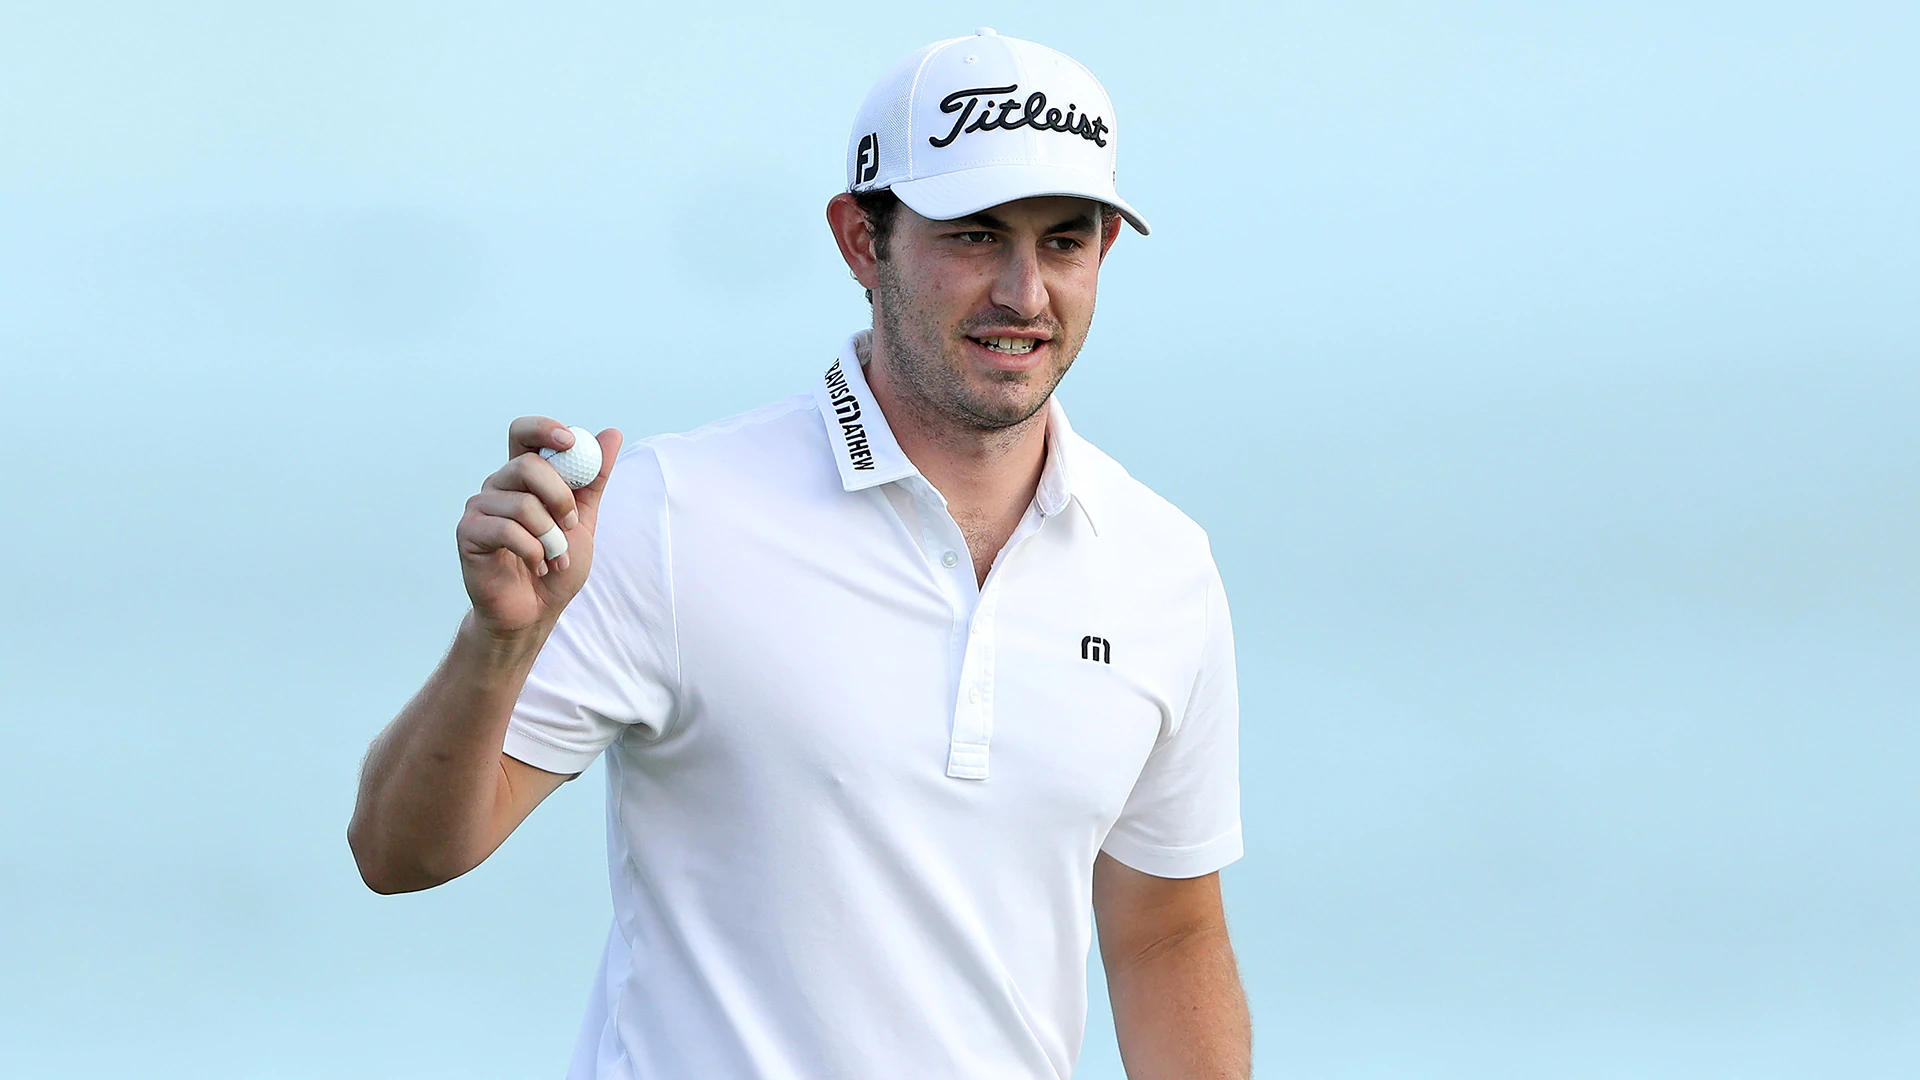 Cantlay co-leads in first start after sinus surgery